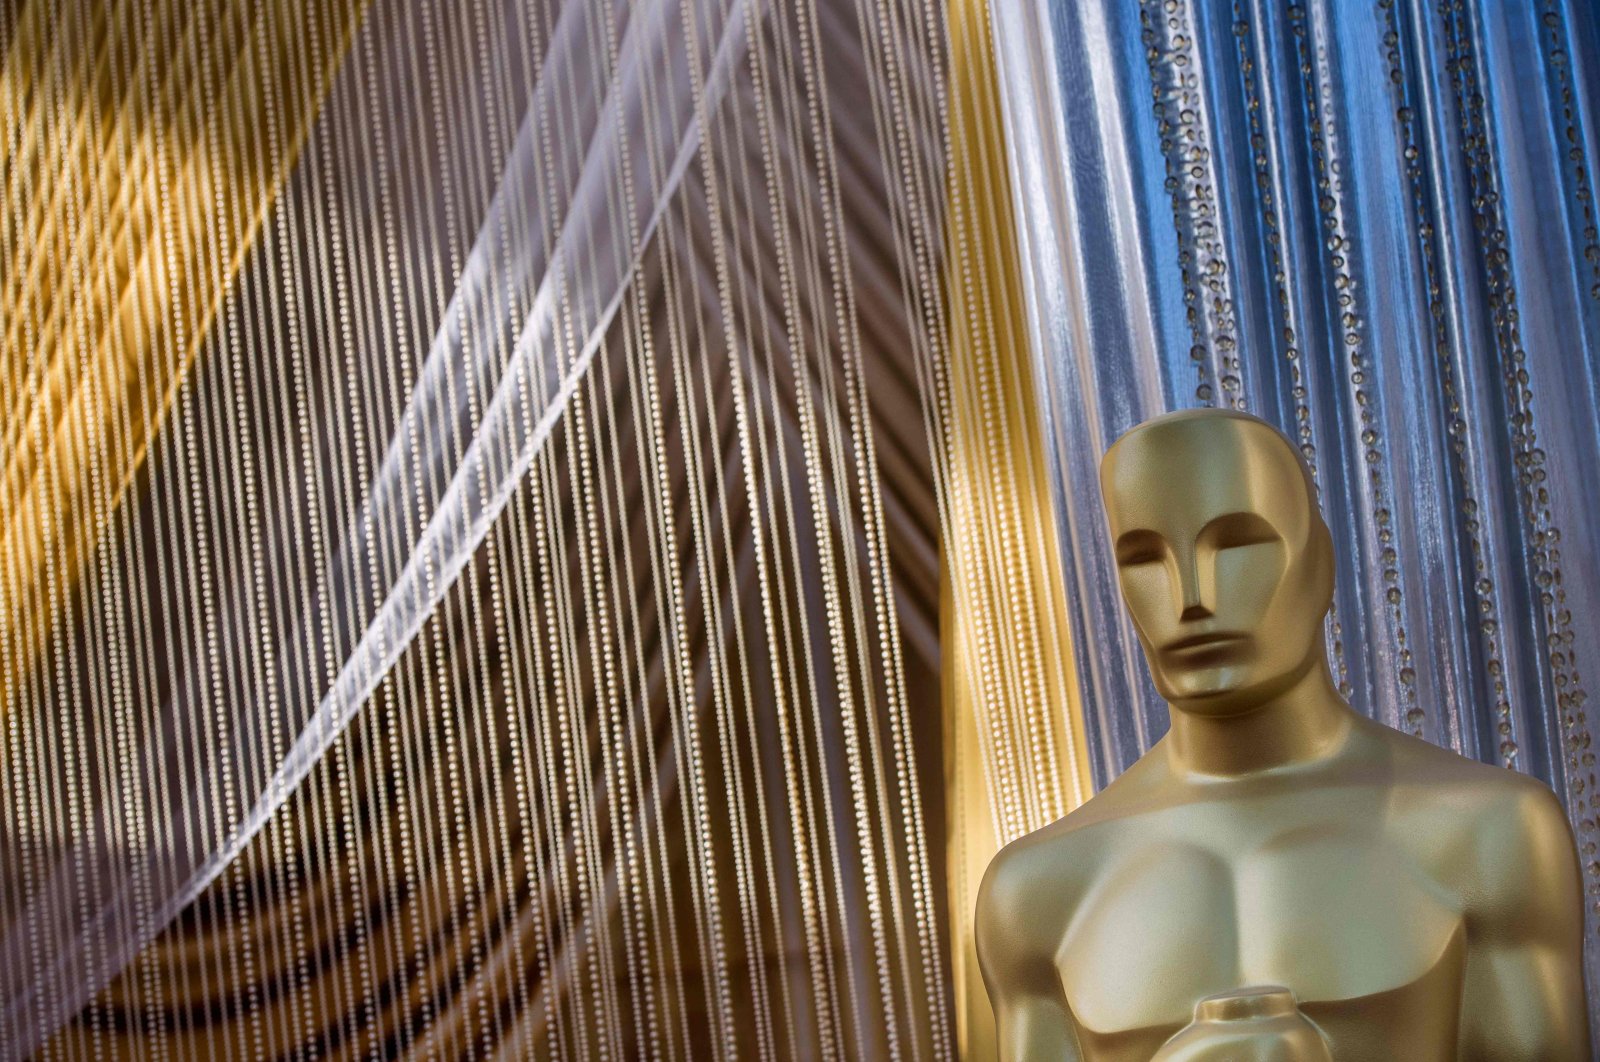 An Oscars statue is displayed on the red carpet area on the eve of the 92nd Oscars ceremony at the Dolby Theater in Hollywood, California, the U.S., Feb. 8, 2020. (AFP Photo)